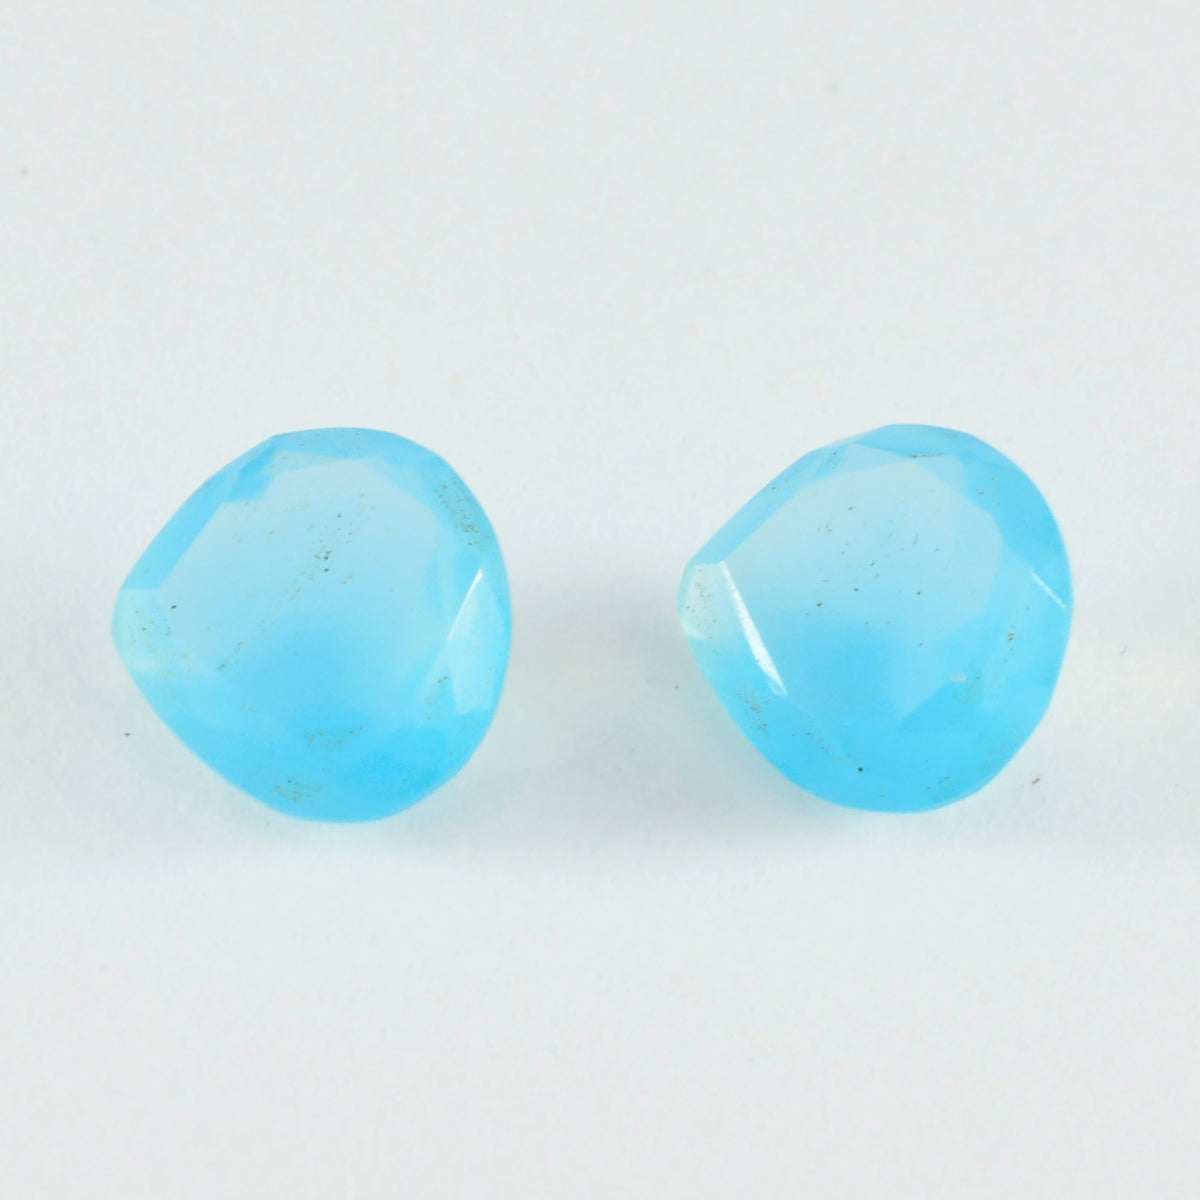 Riyogems 1PC Real Aqua Chalcedony Faceted 13x13 mm Heart Shape awesome Quality Gems